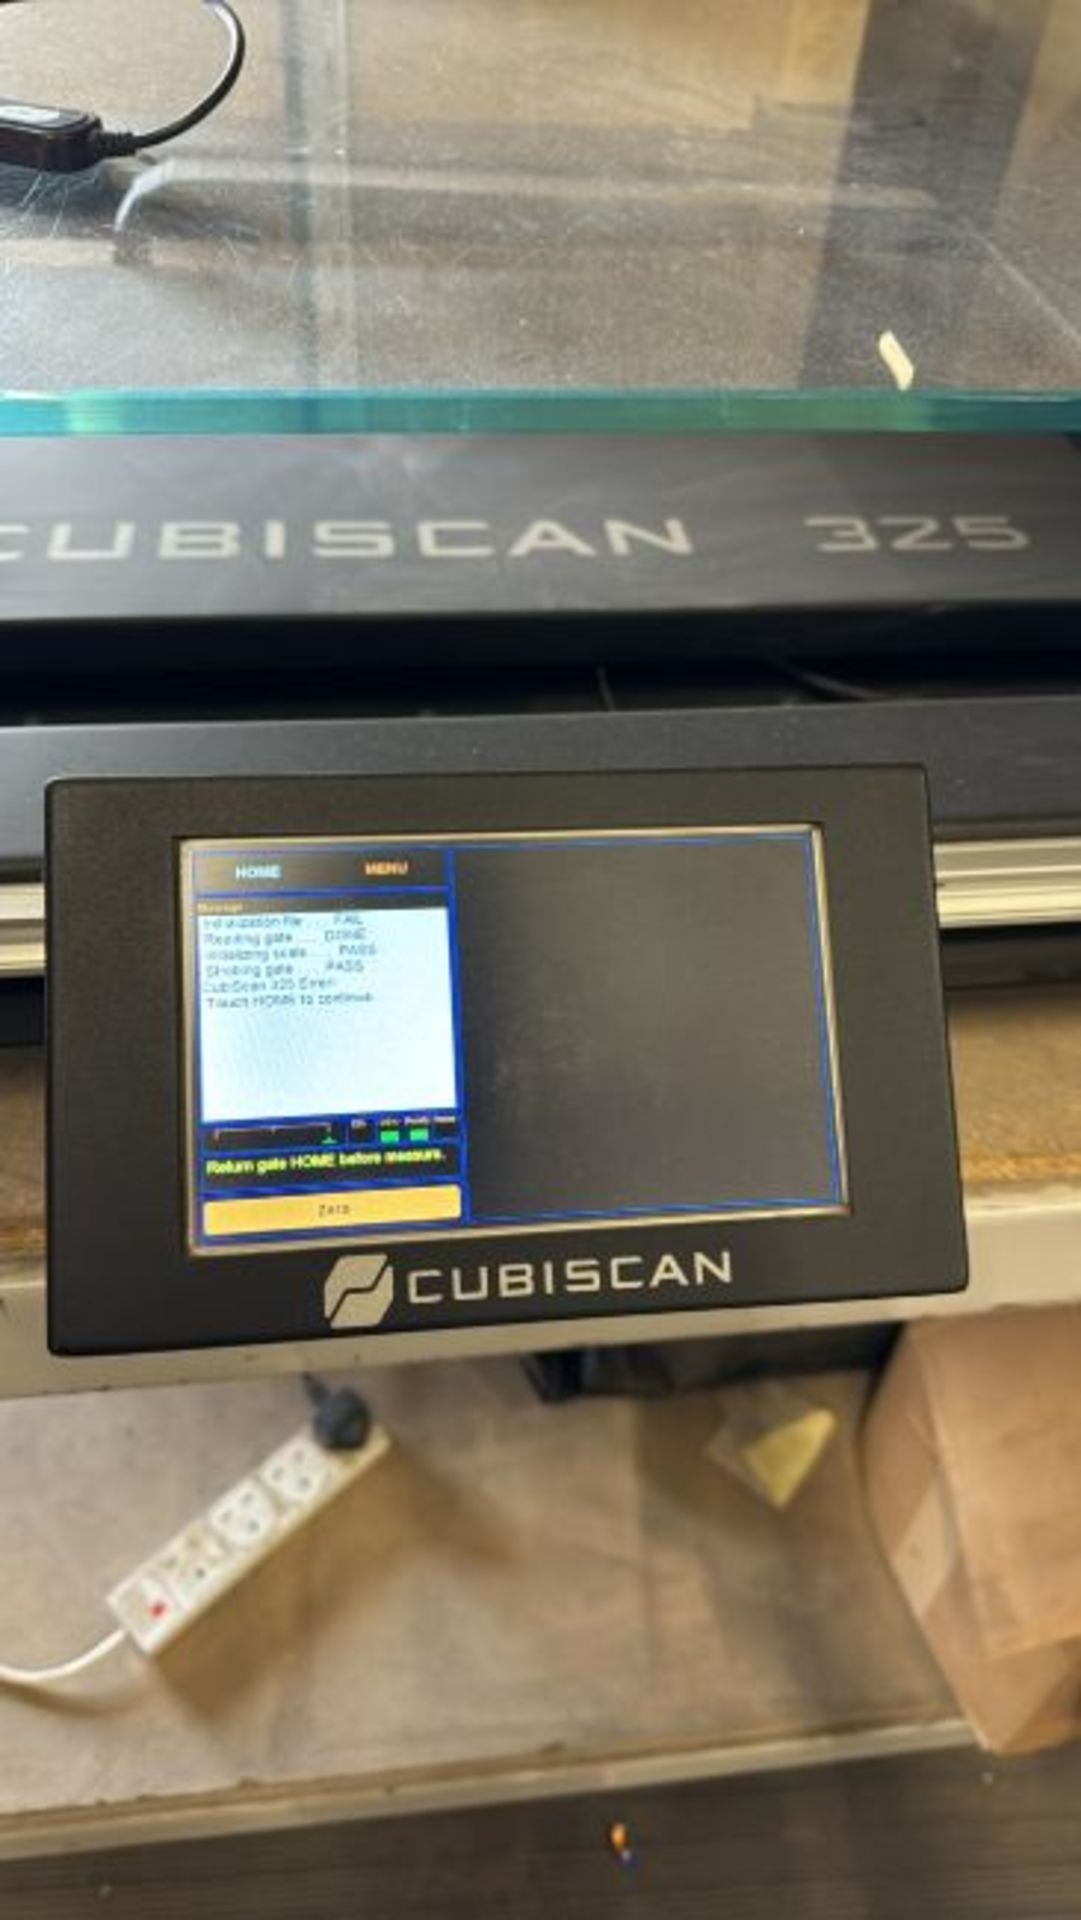 Cubiscan 325 - Excels at dimensioning apparel and non-rigid items - Image 2 of 13